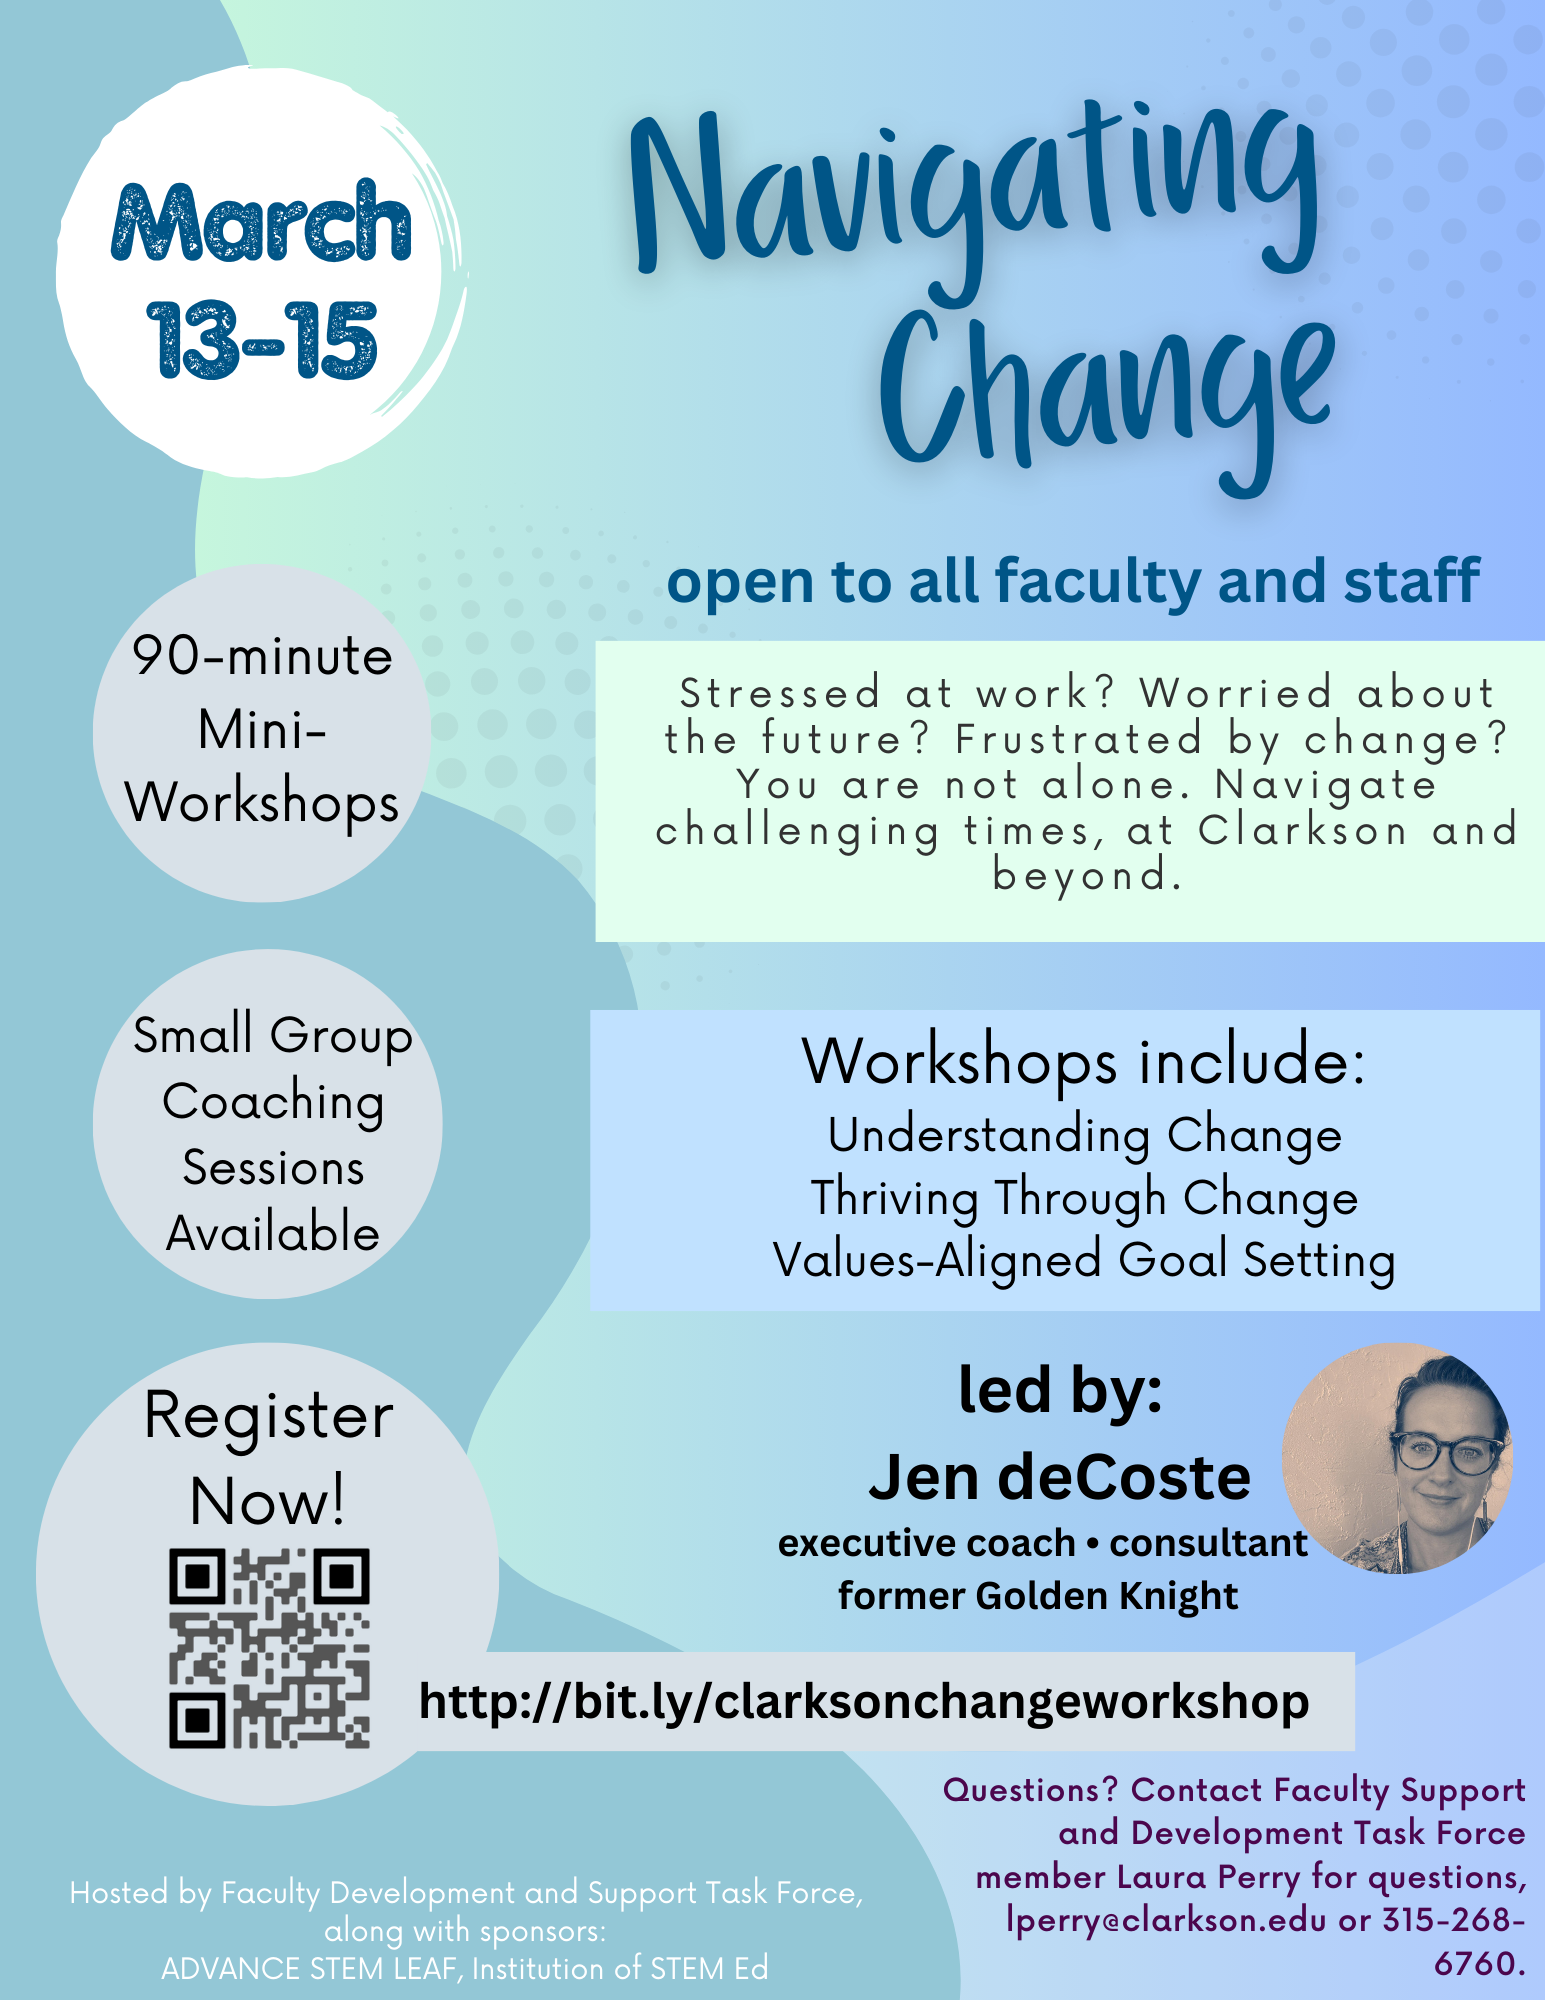 Navigating Change Open to all faculty and staff. March 13-15, mini workshops and small group consulting.